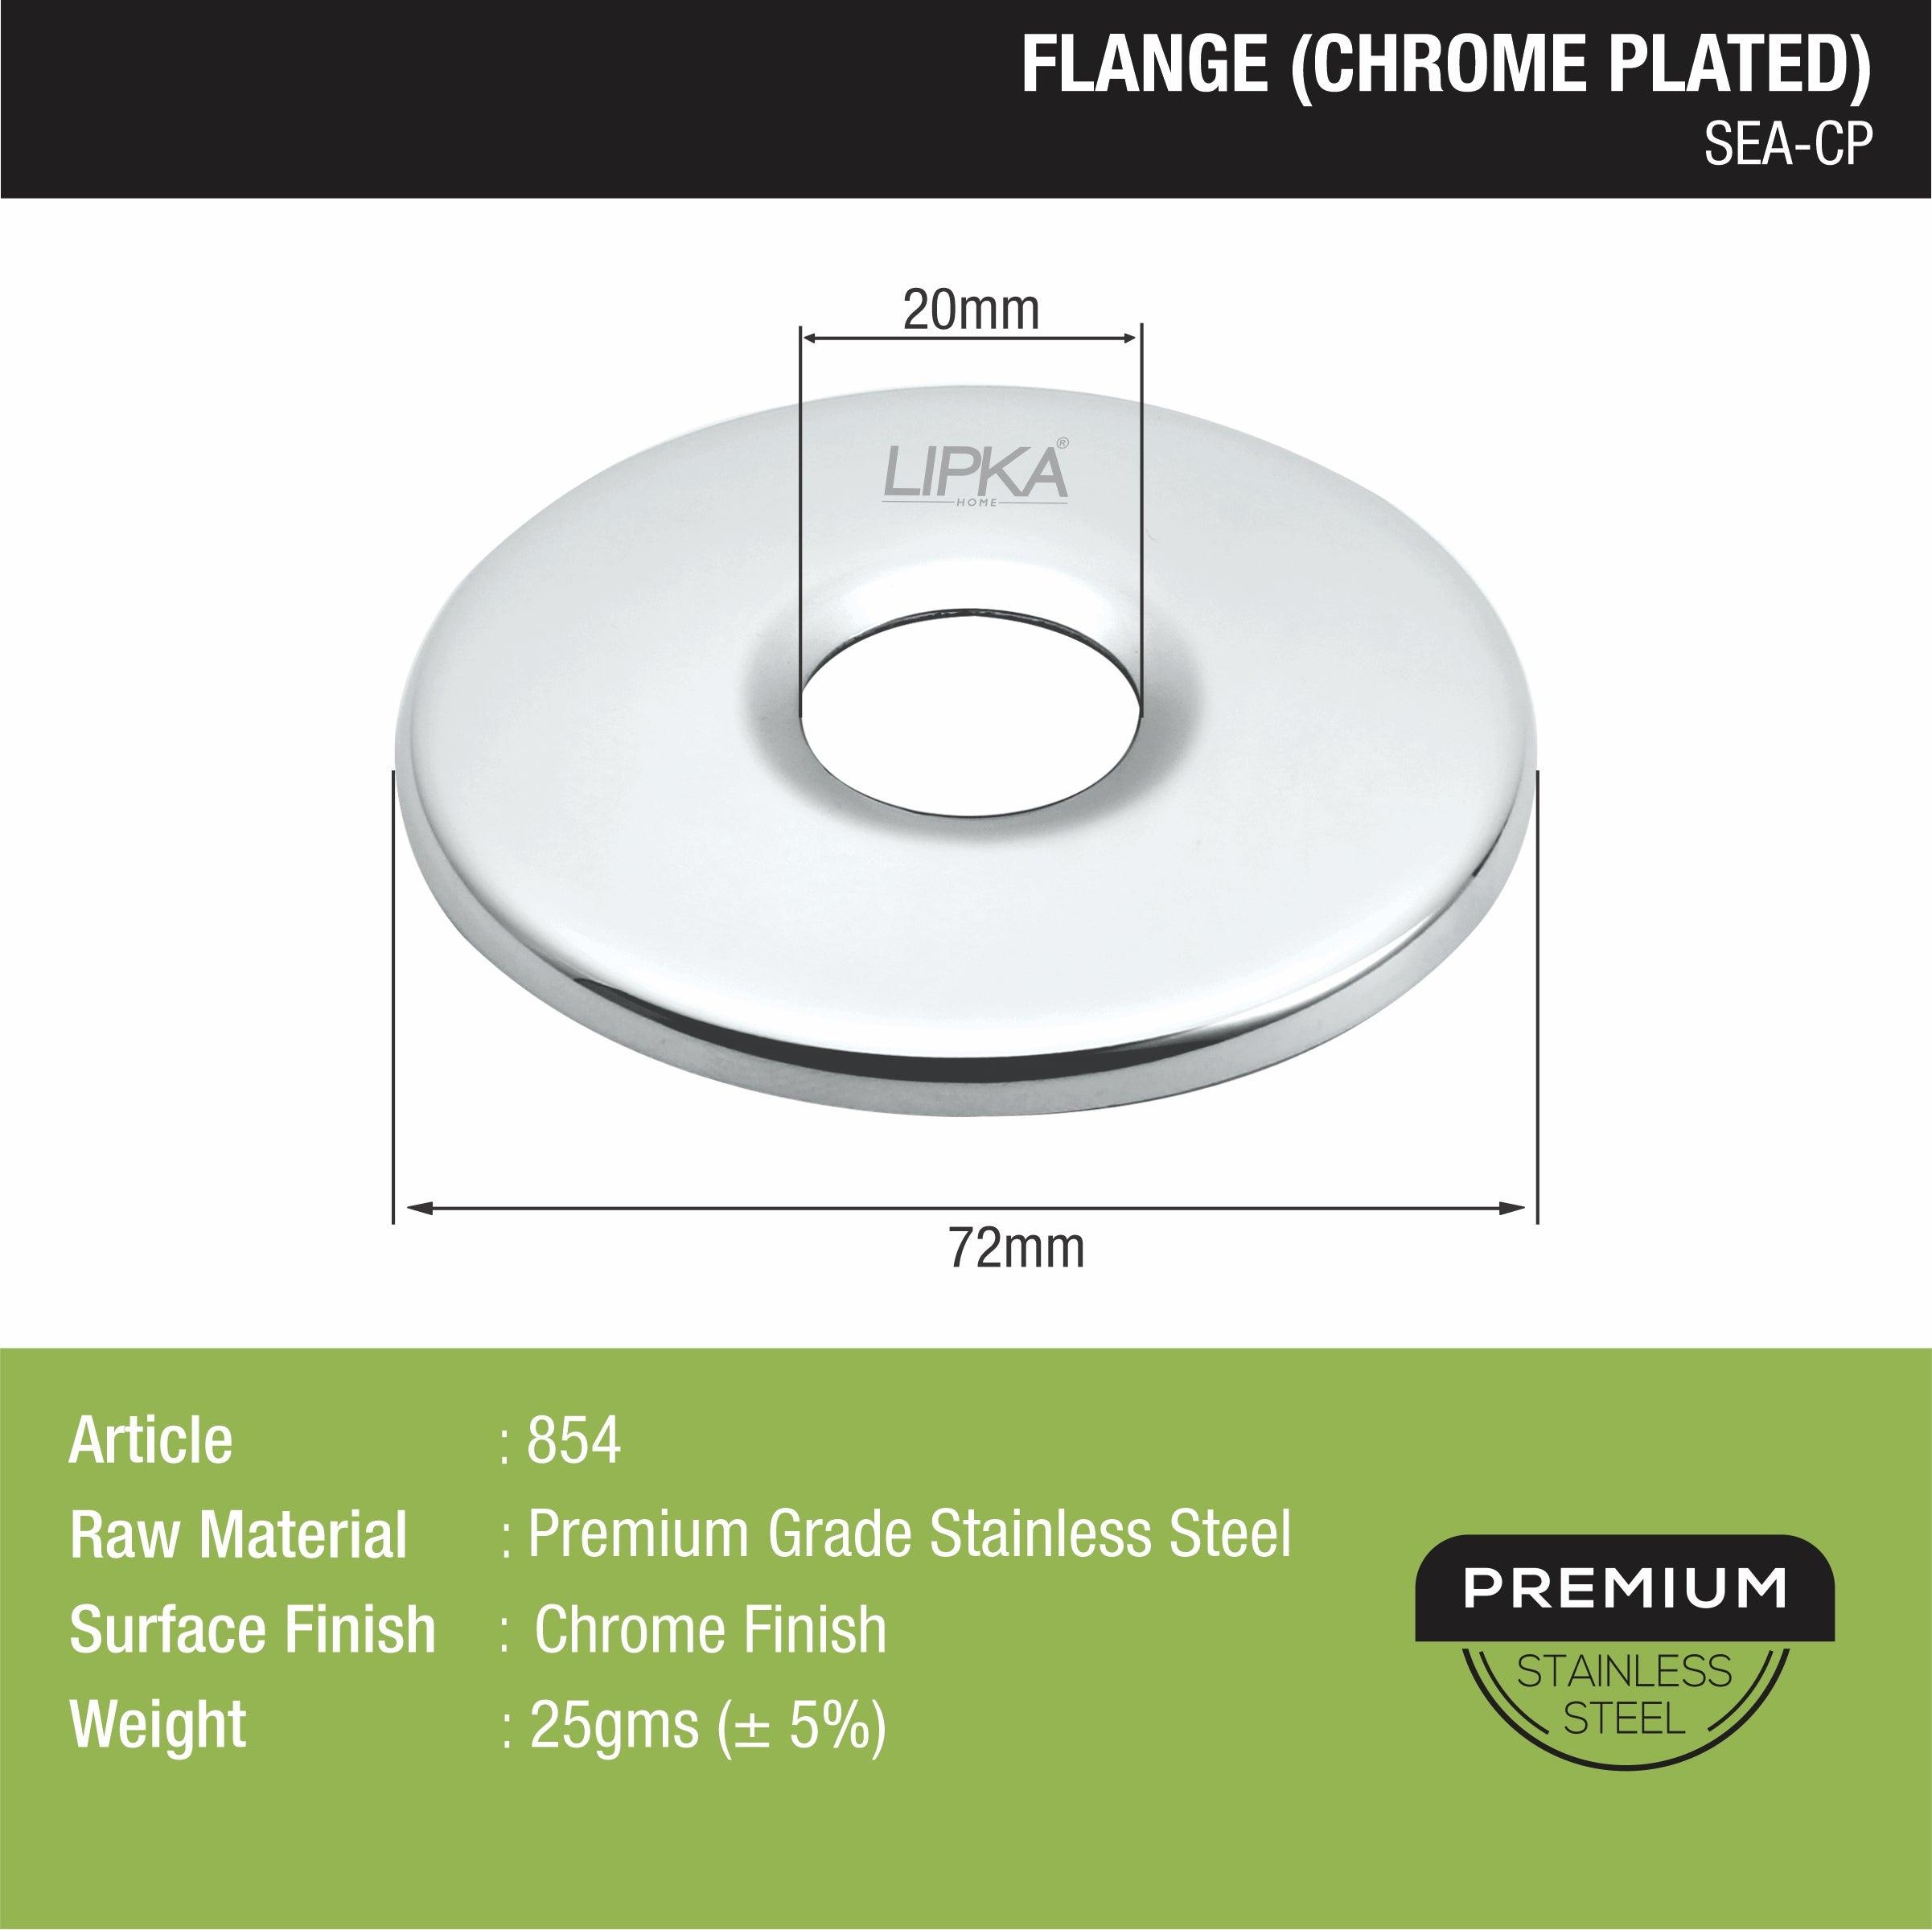 Sea Flange (Chrome Plated) sizes and dimensions